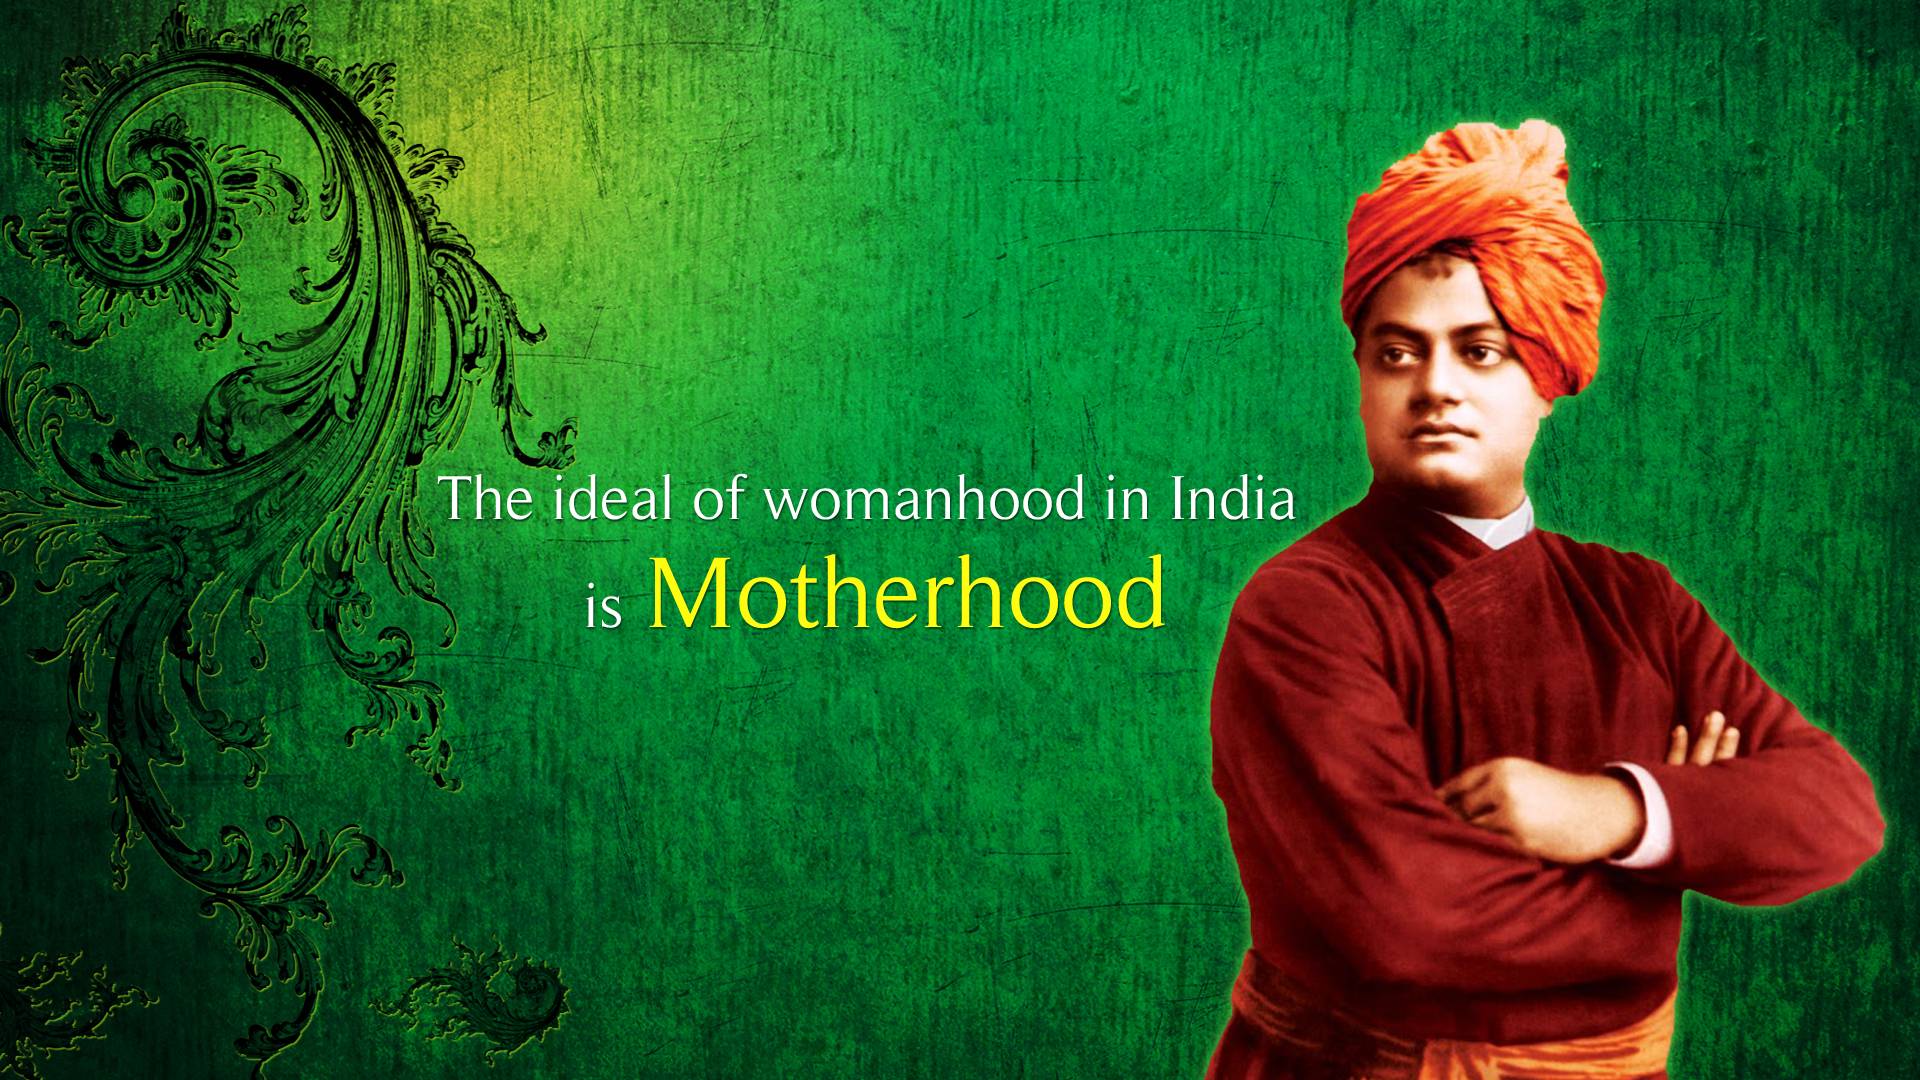 Poster Swami Vivekananda Life Quote ON FINE ART PAPER HD QUALITY WALLPAPER  POSTER : Amazon.in: Home & Kitchen